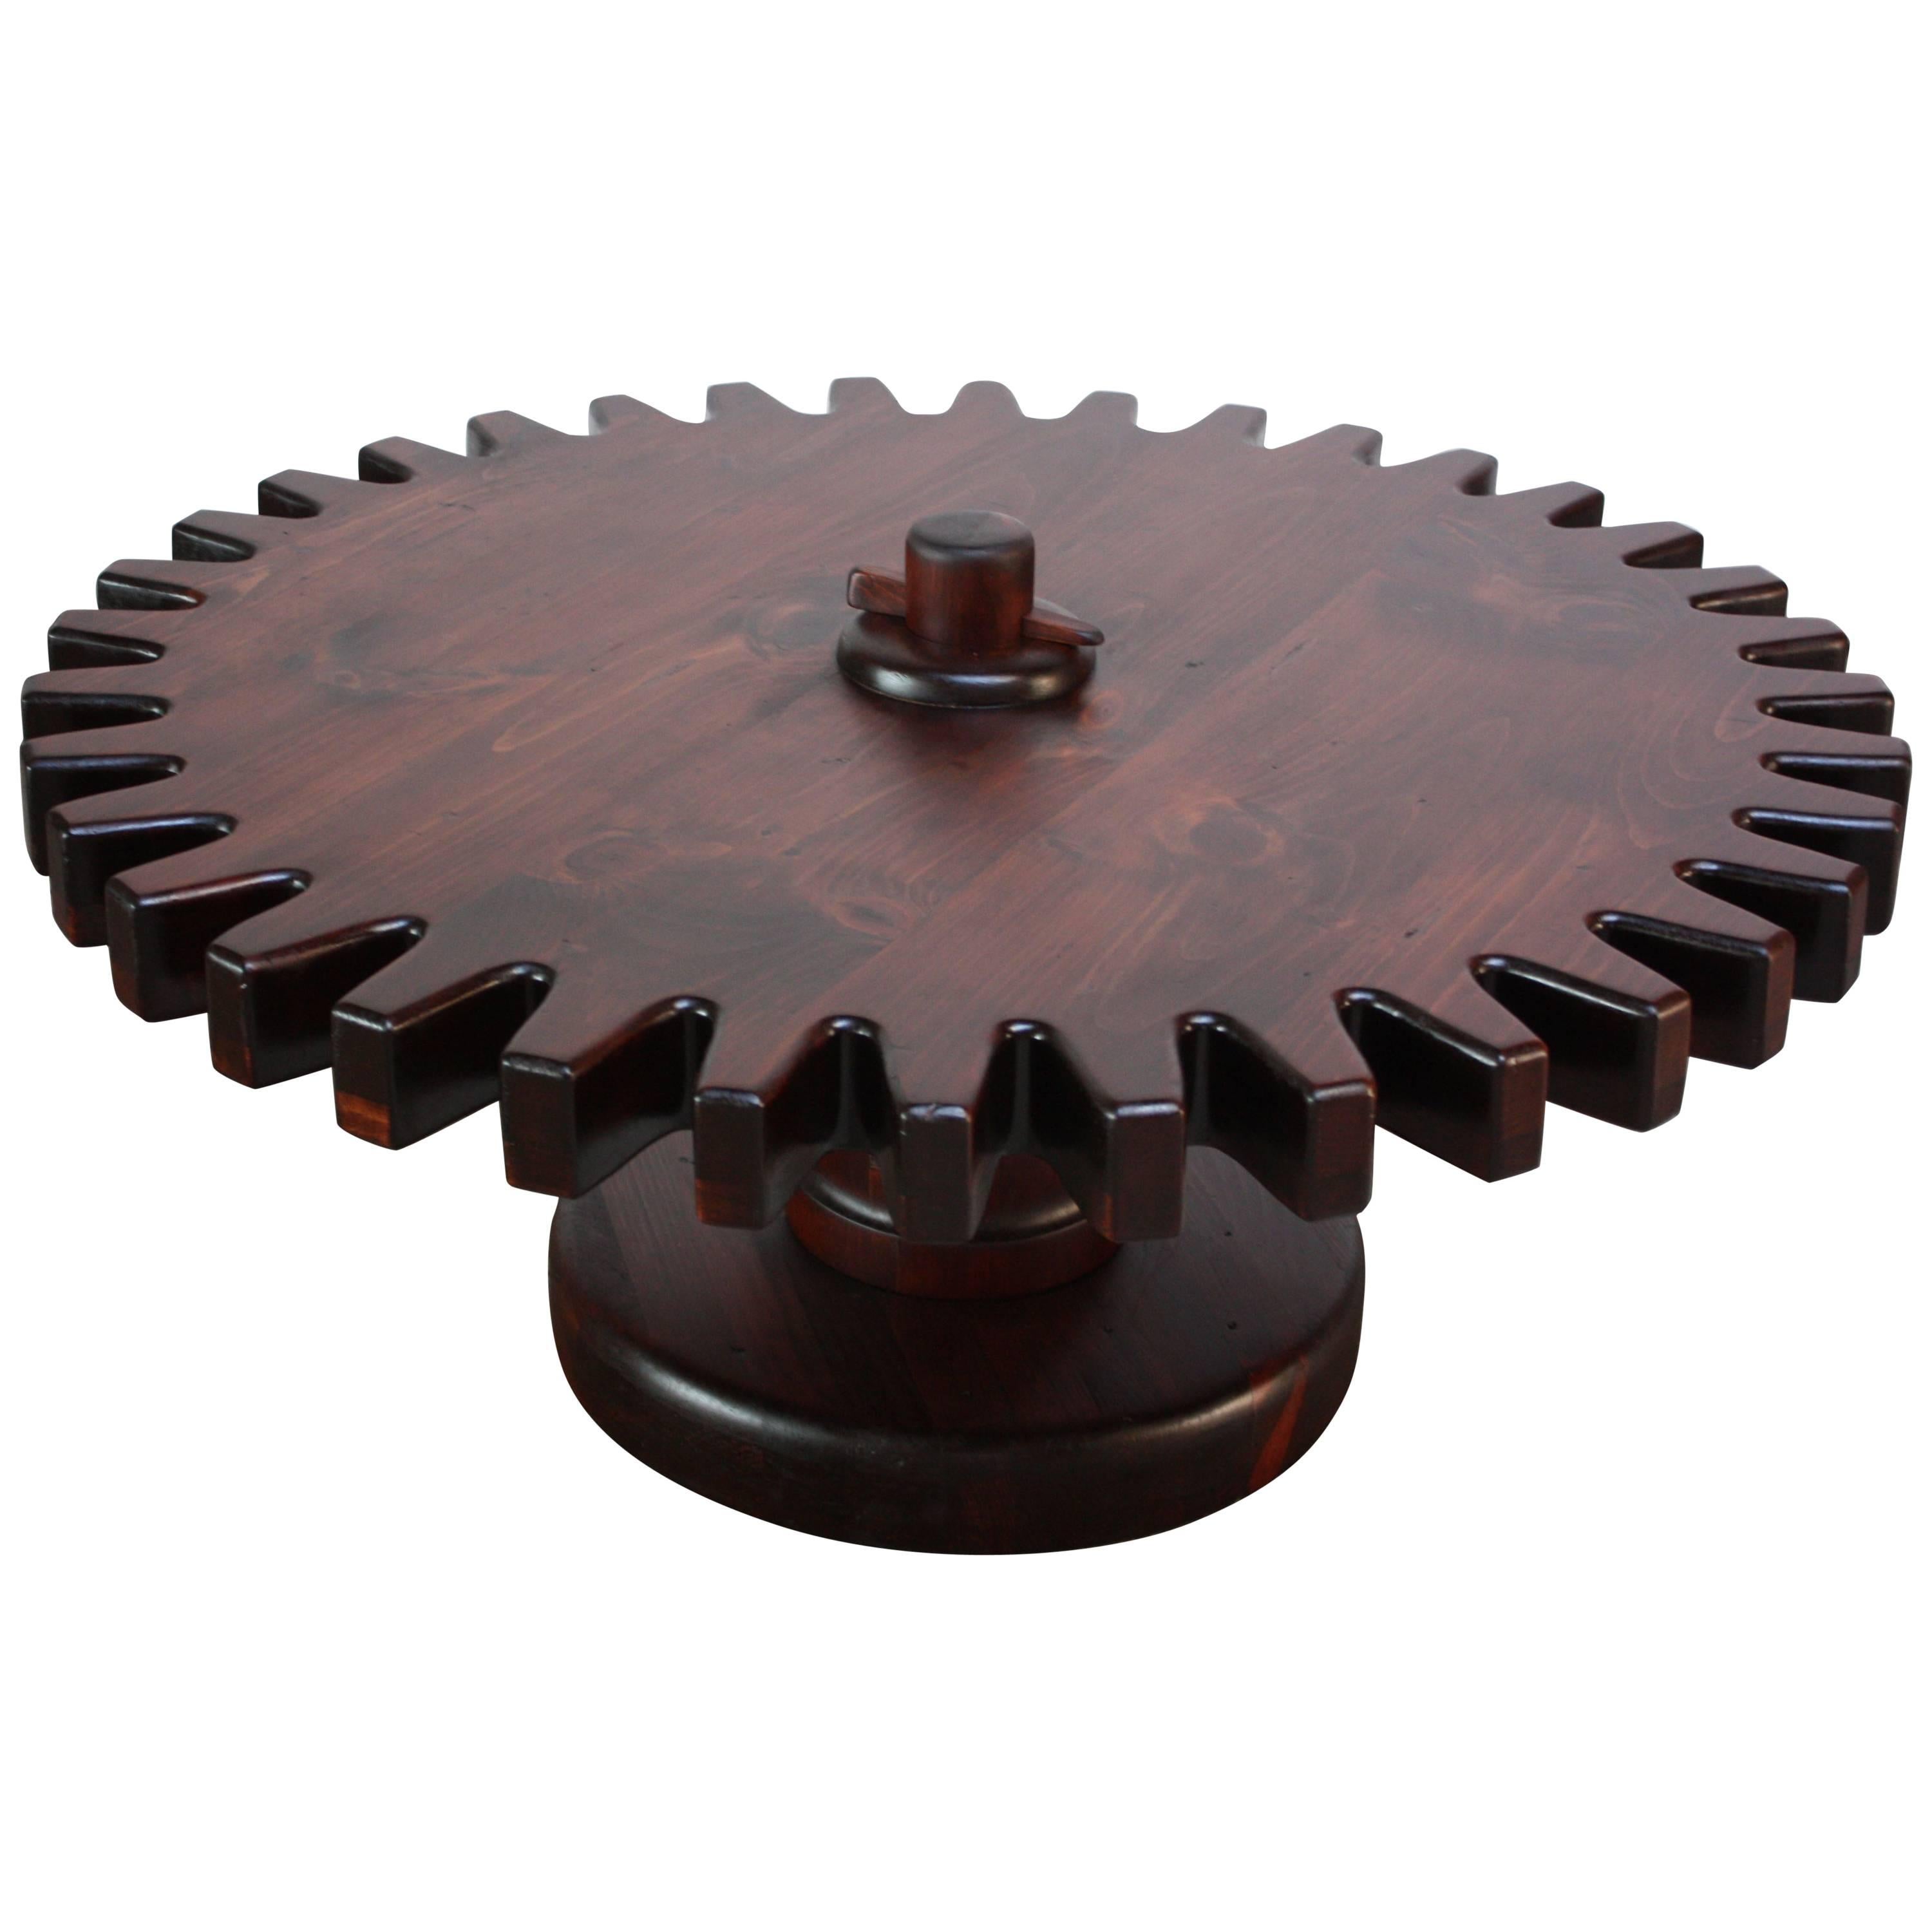 Rustic 'Cog' Swiveling Coffee Table in Stained Pine